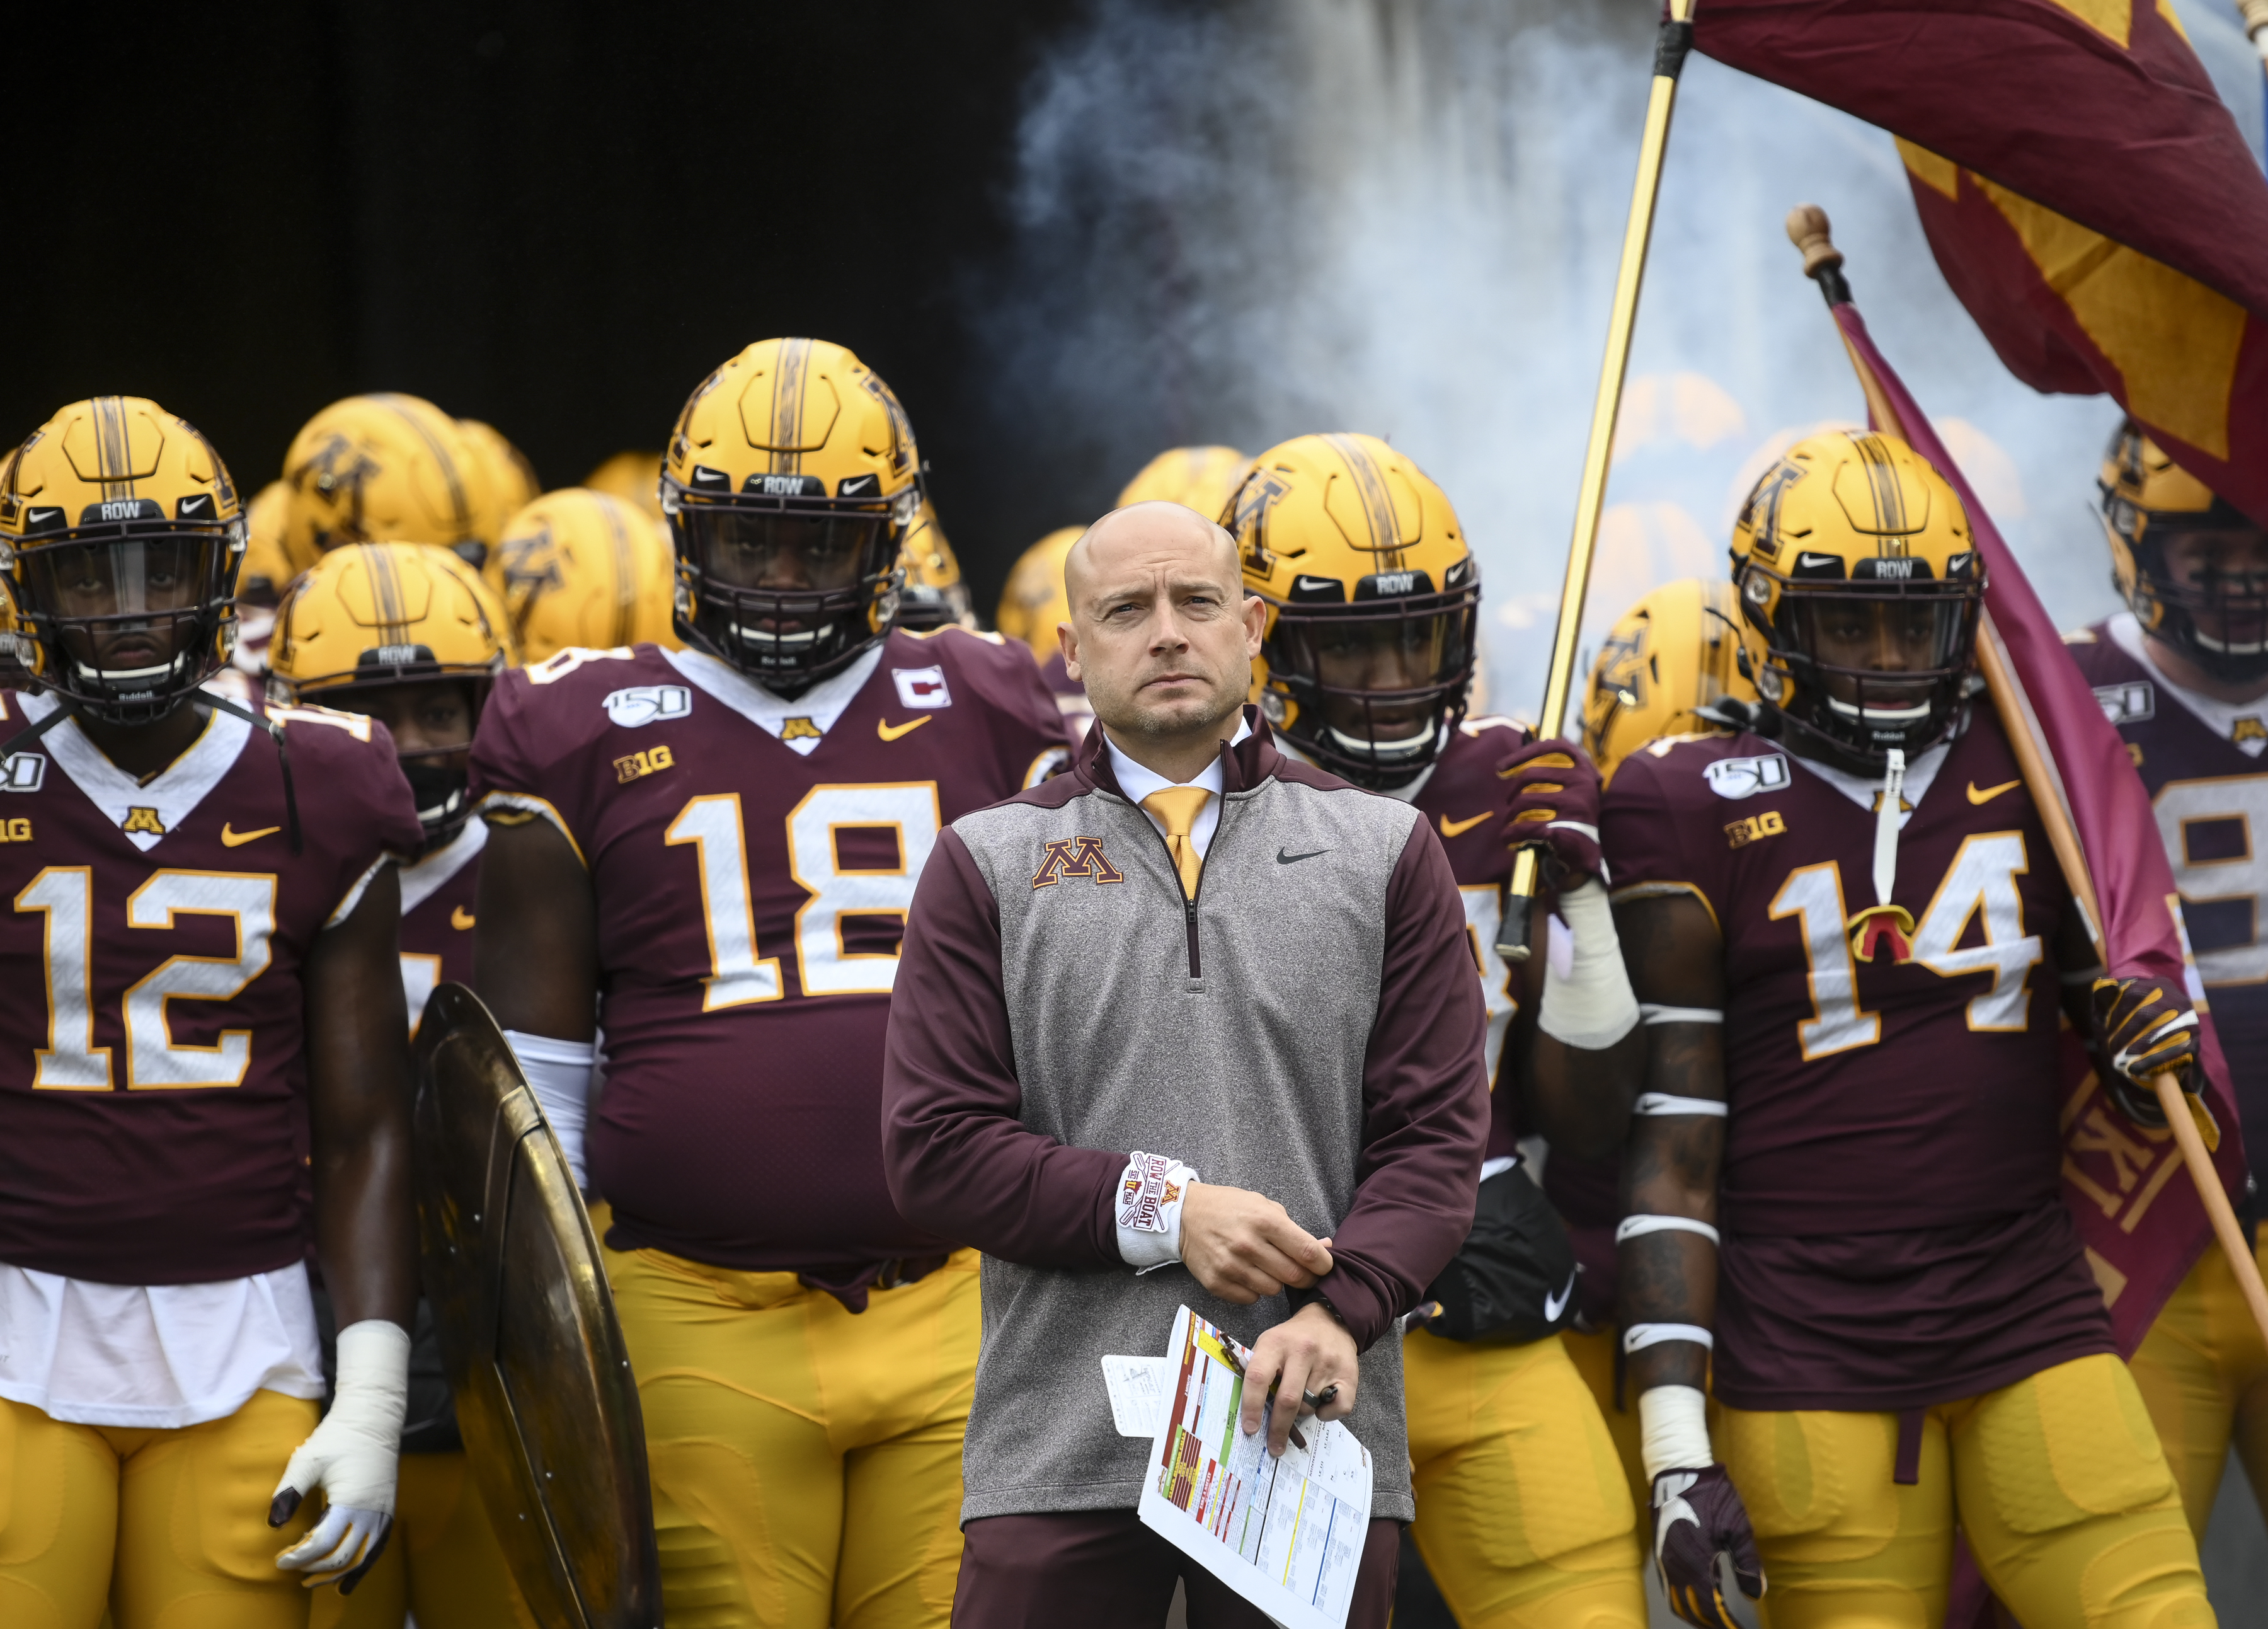 P.J. Fleck and the Gophers waited to take the field before playing at TCF Bank Stadium.